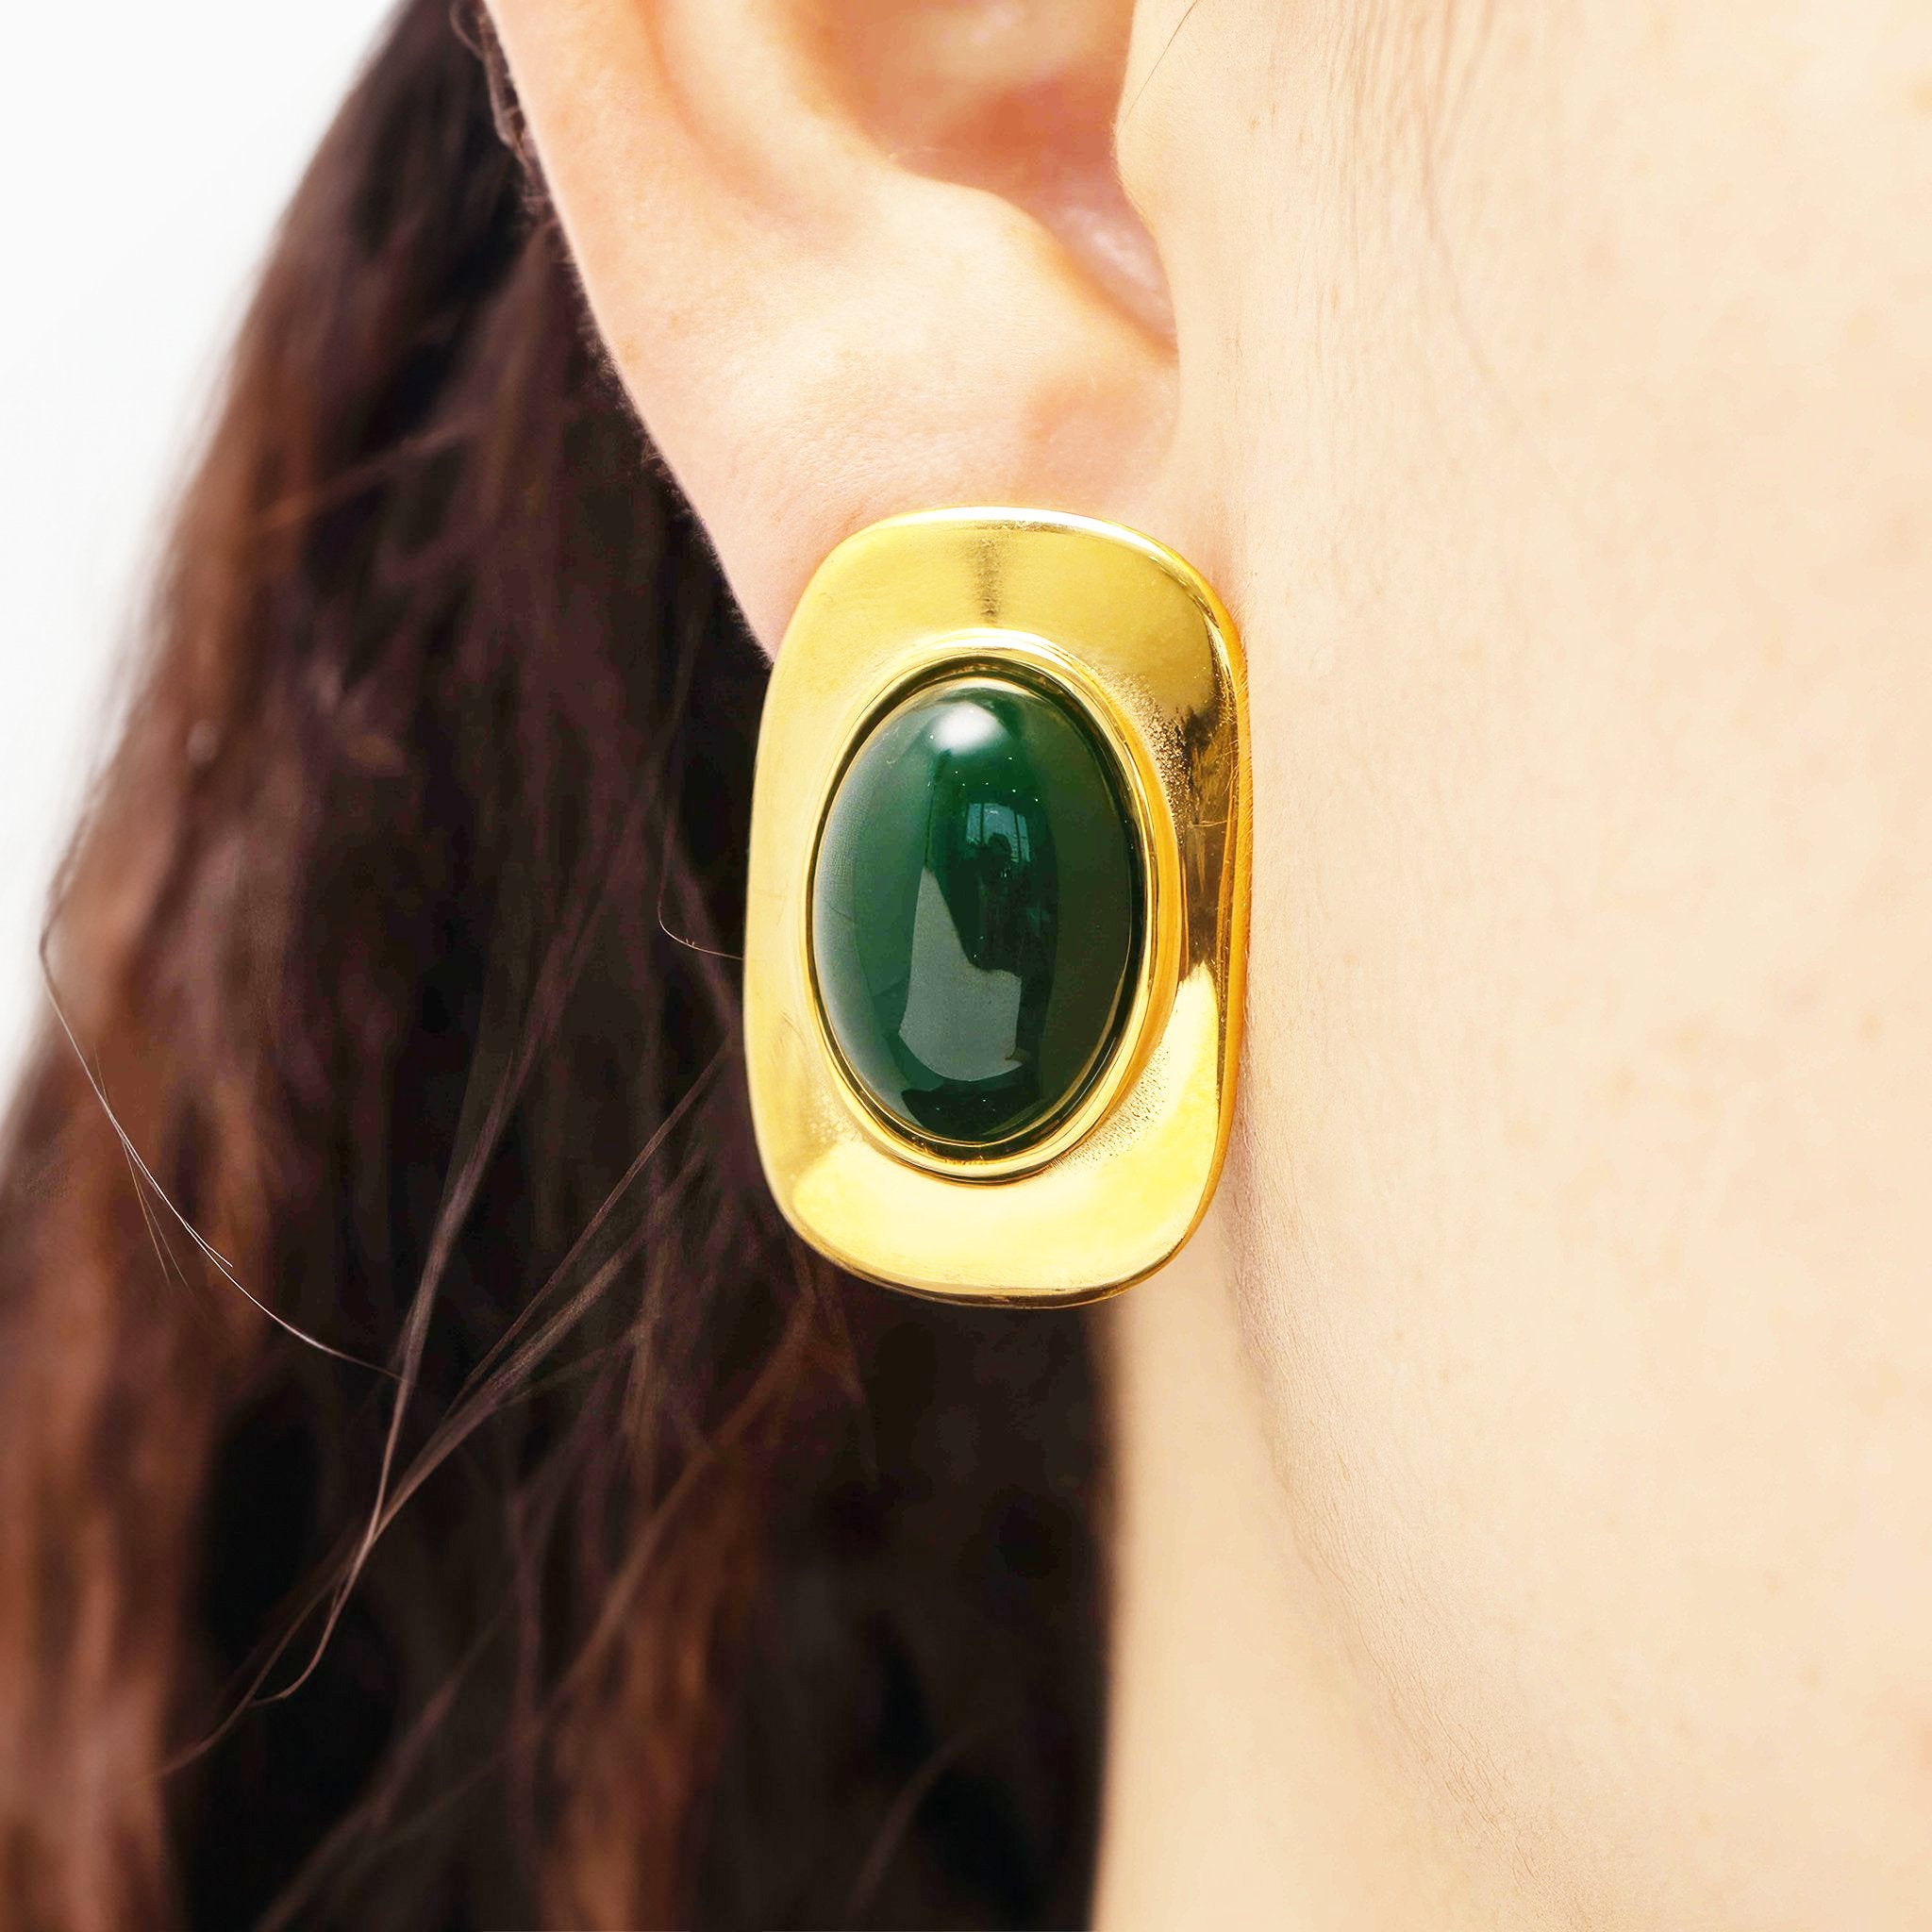 Oval Design Earrings - Nobbier - Earrings - 18K Gold And Titanium PVD Coated Jewelry